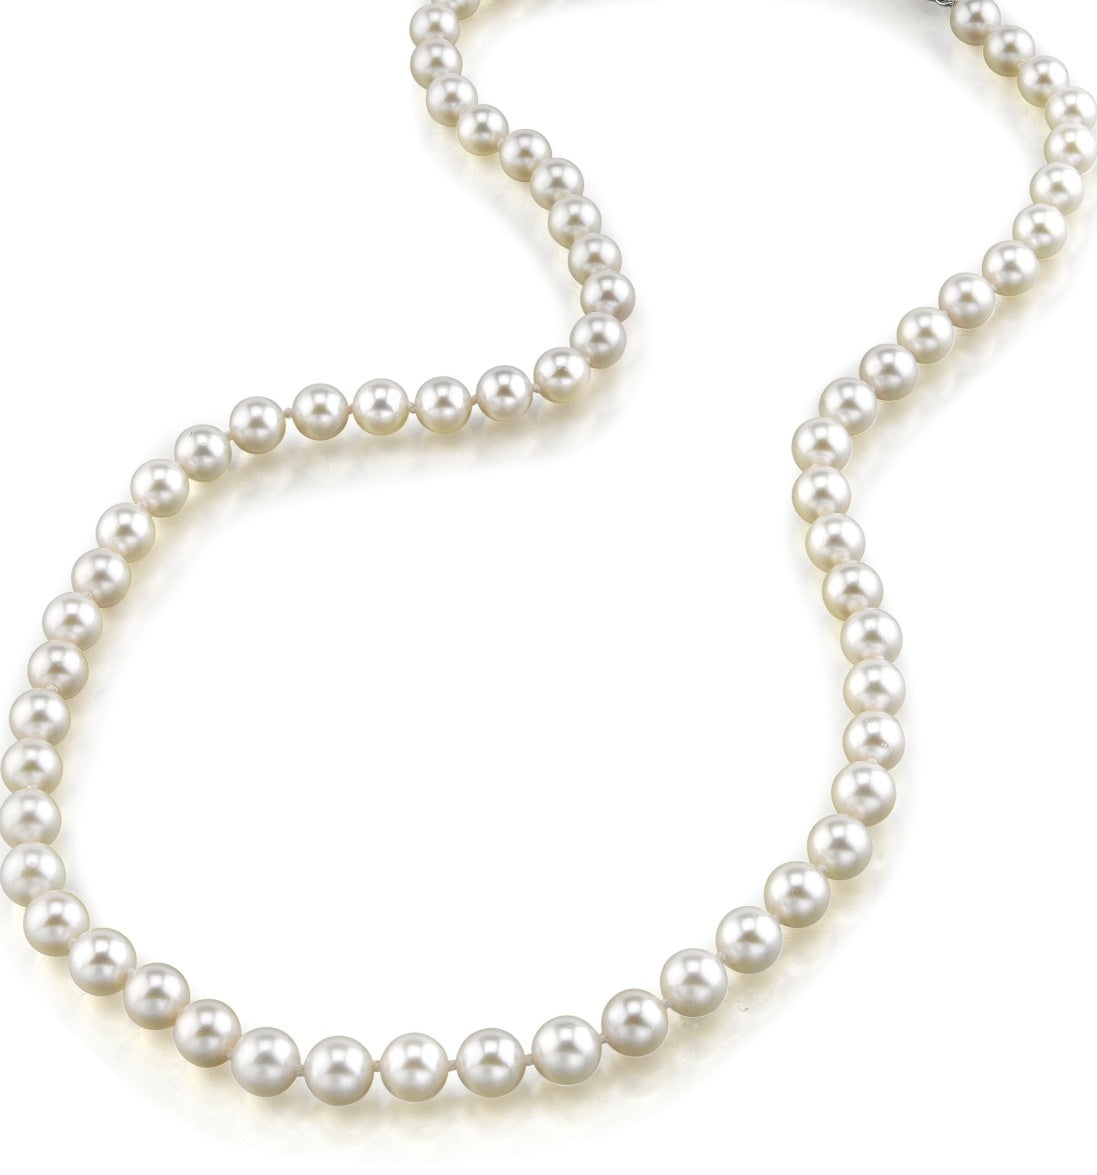 14KY "AA" Saltwater Cultured Graduated Pearl Strand 32in 3.5-7mm